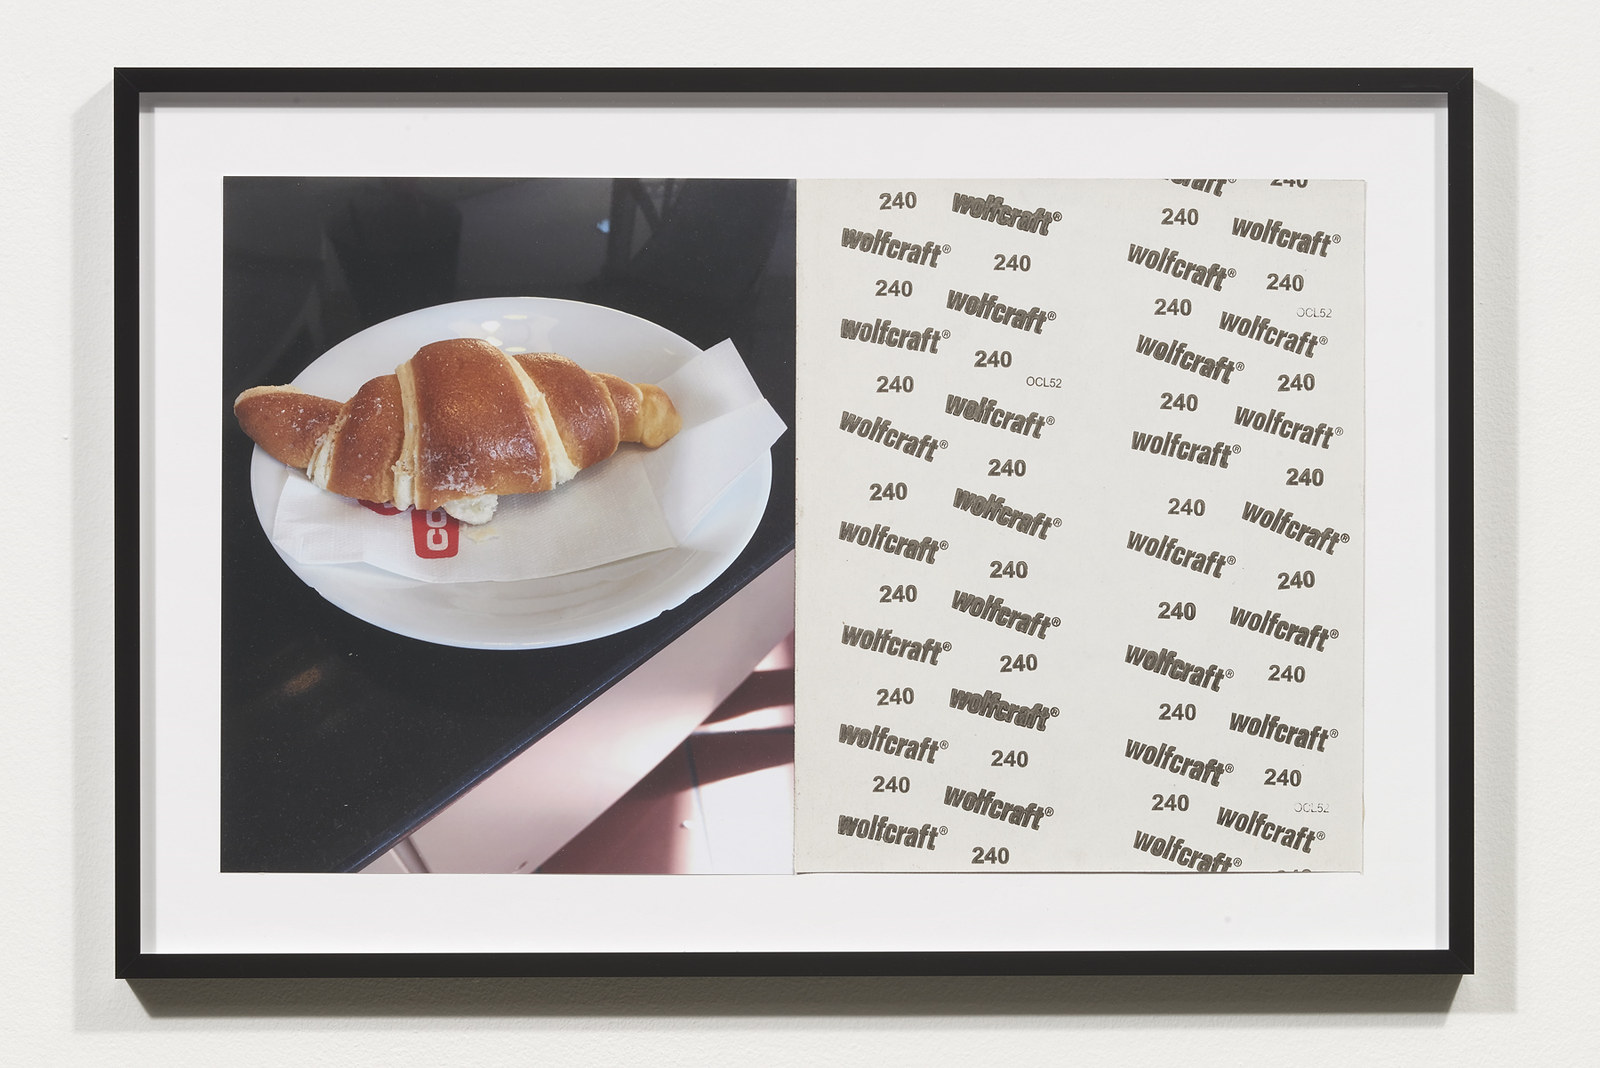 Wermers_Croissants & Architecture #16, 2016_C-print, sandpaper sheet, framed_14 3_8 x 21 1_2 in_NW00057PG